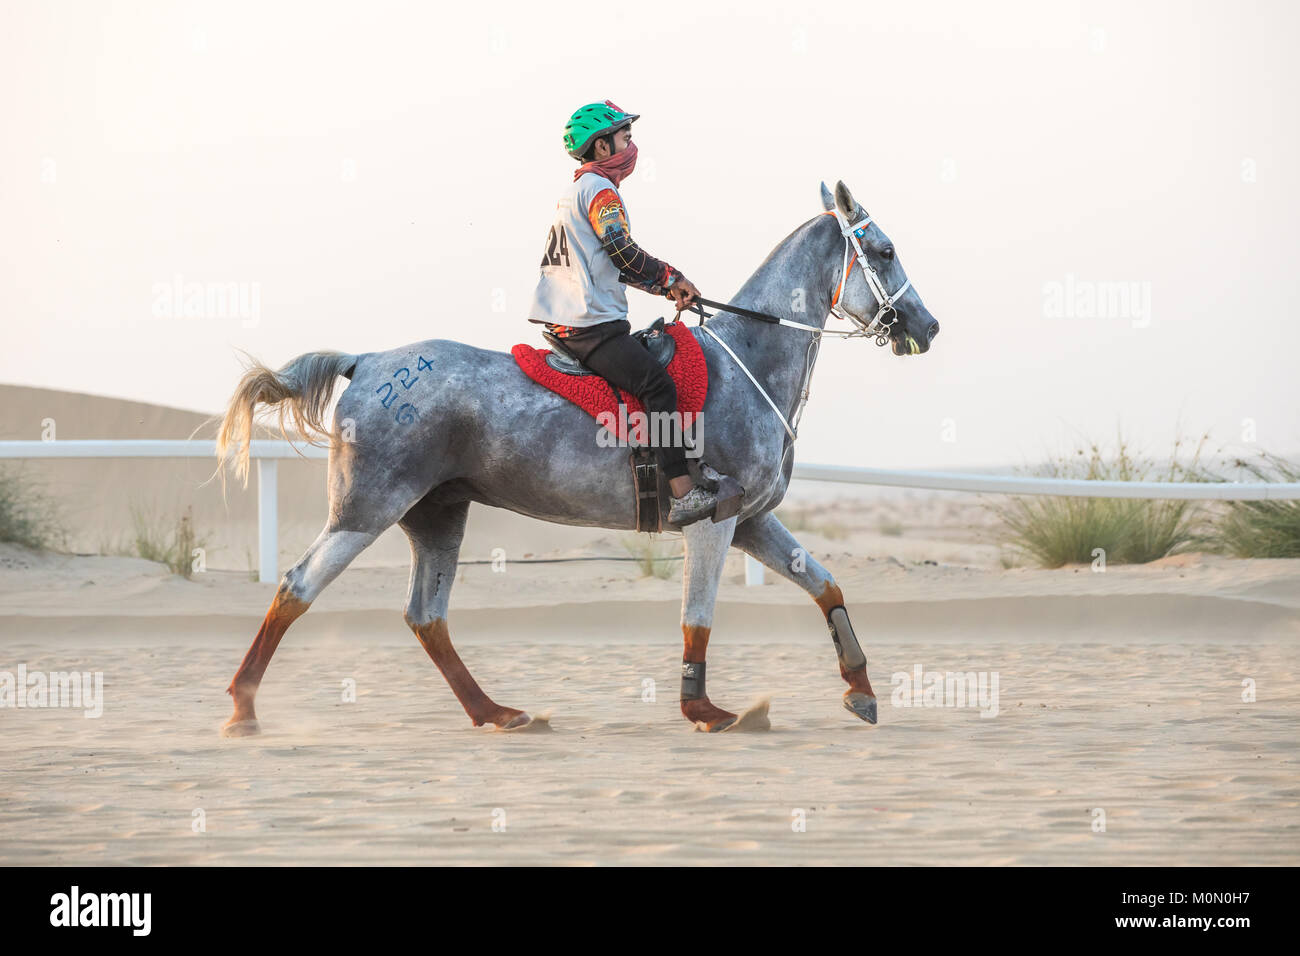 An athletic rider competing in a long-distance endurance race in the desert at sunset. Dubai, UAE. Stock Photo